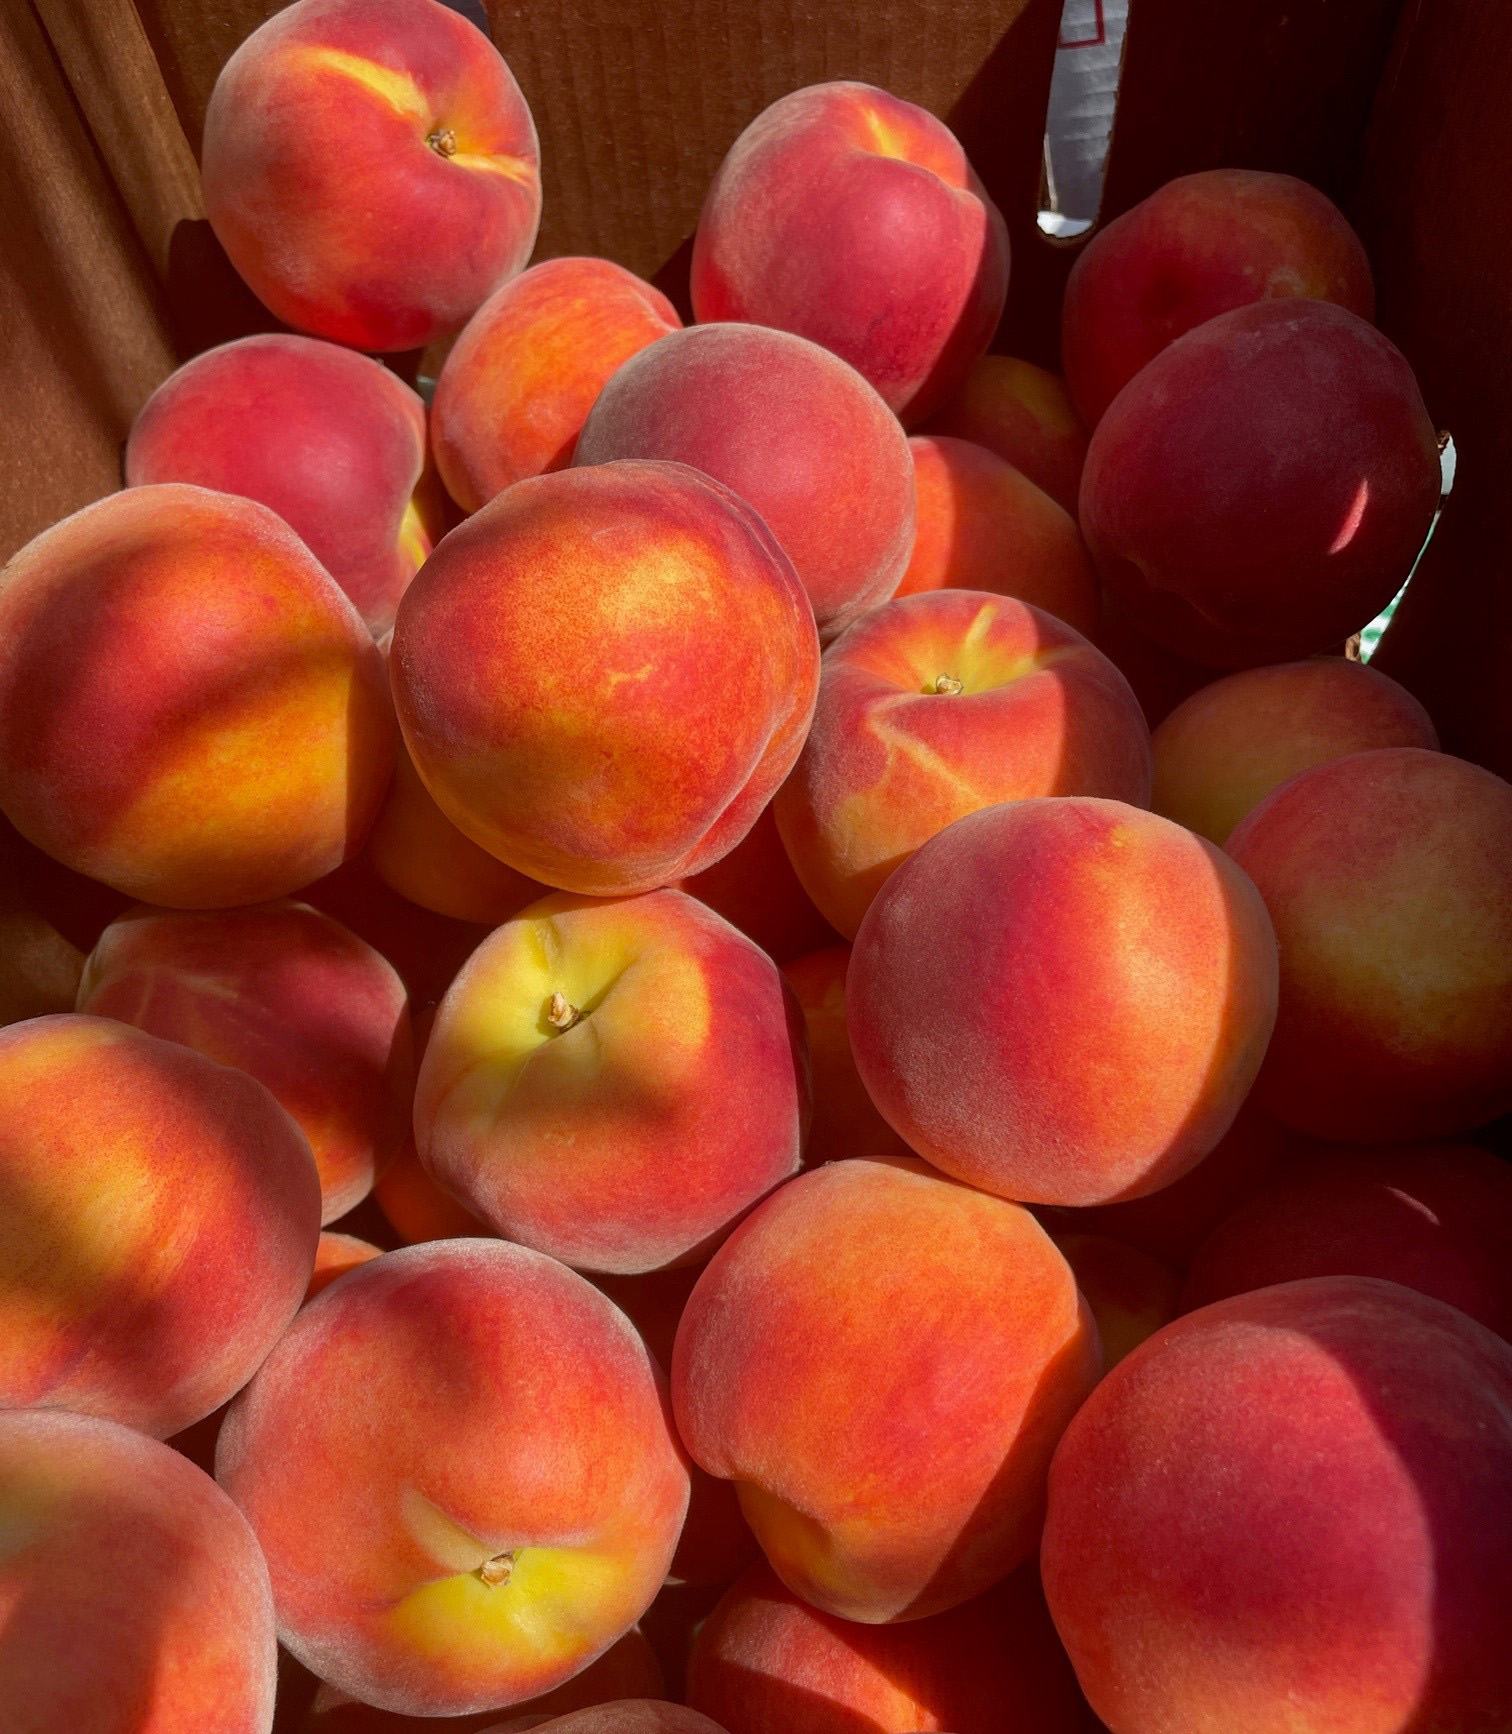 Peaches freshly harvested sitting in a box.